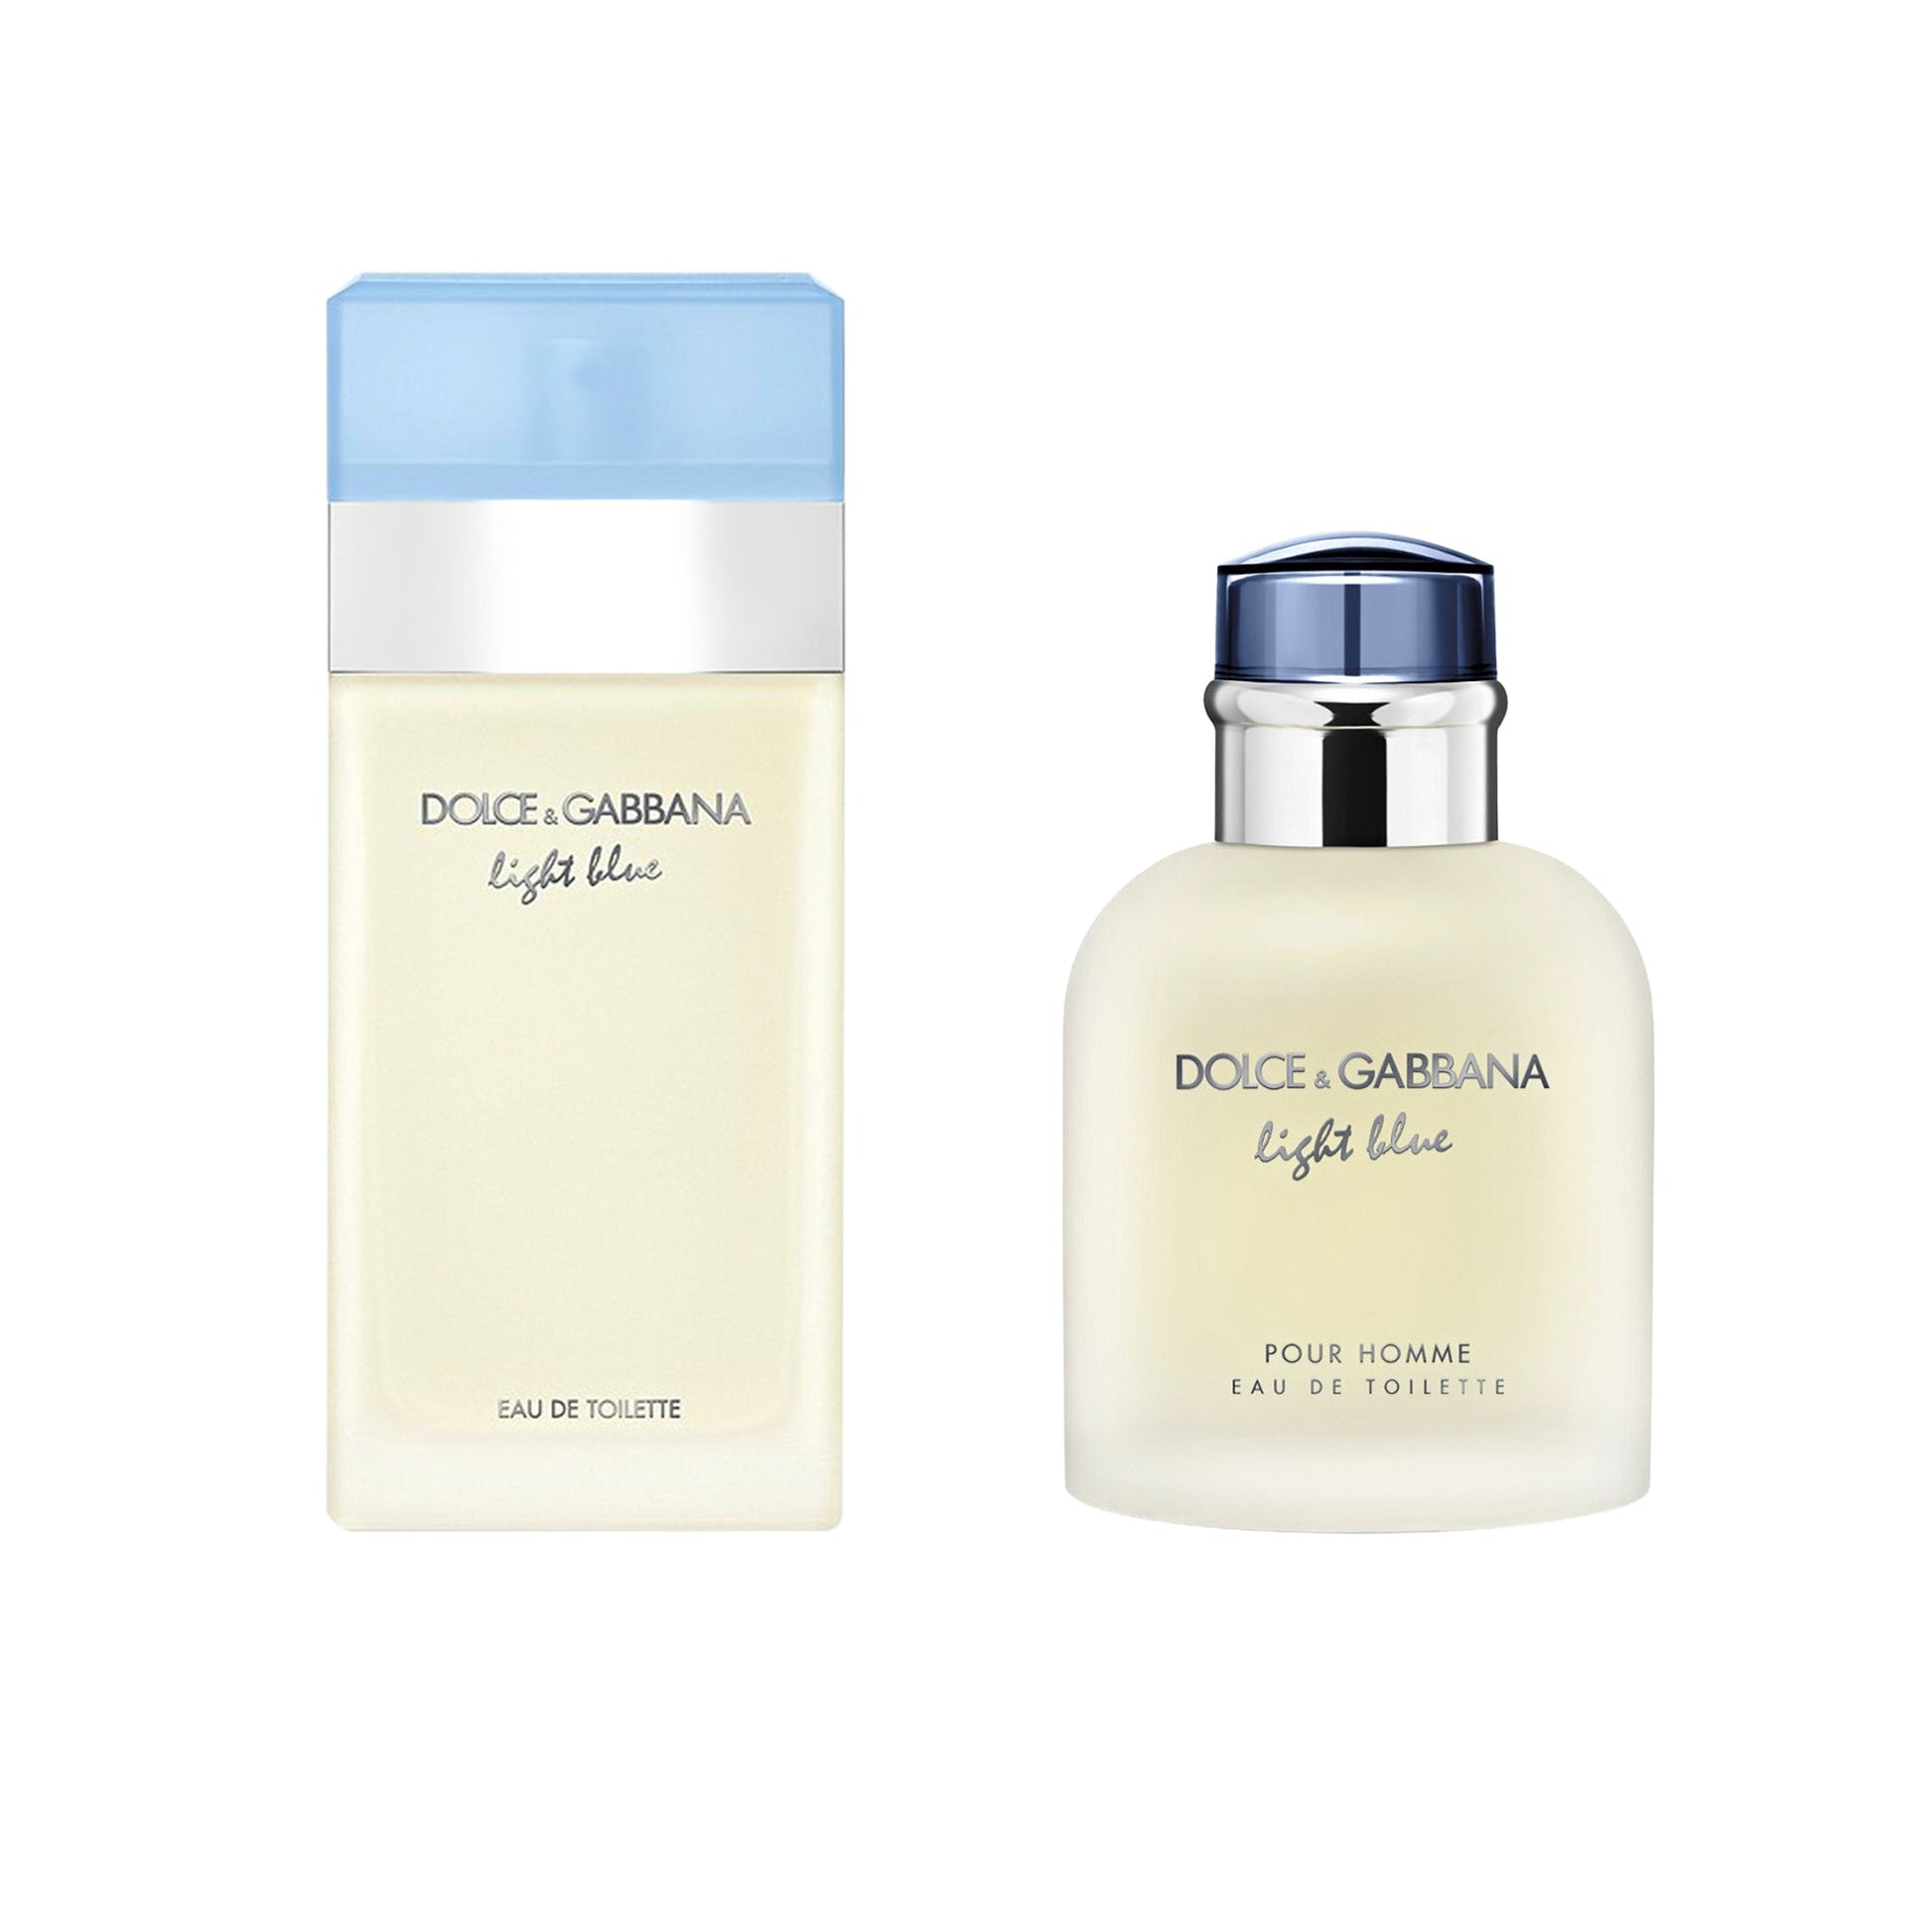 Bundle Deal His & Hers: Light Blue by Dolce & Gabbana for Men and Women, Product image 1